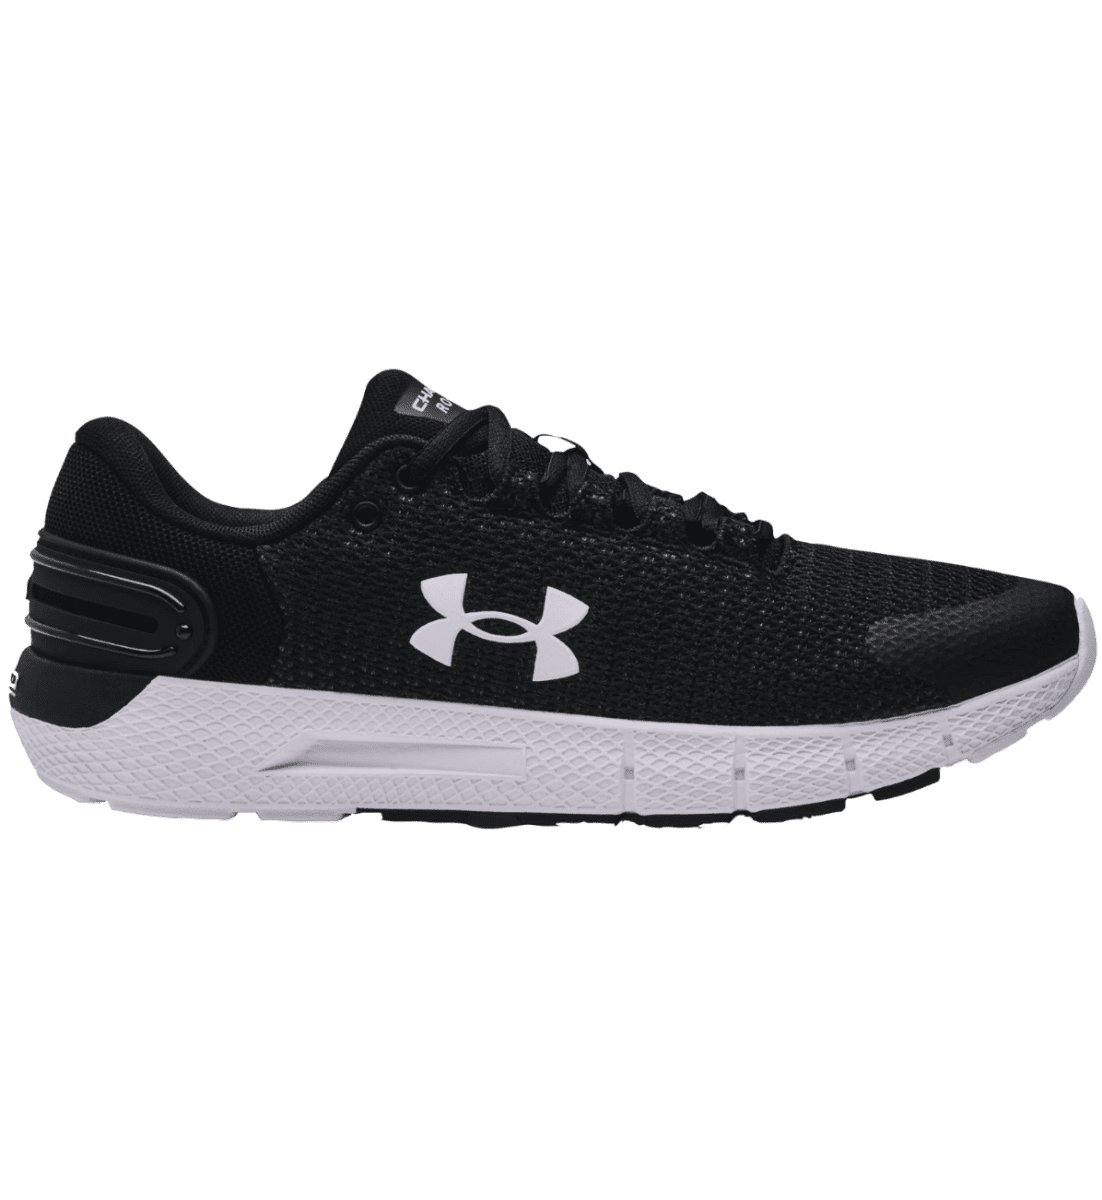 Under Charged Rogue 2.5 Performance Sneakers | White Size 7.5 - Walmart.com